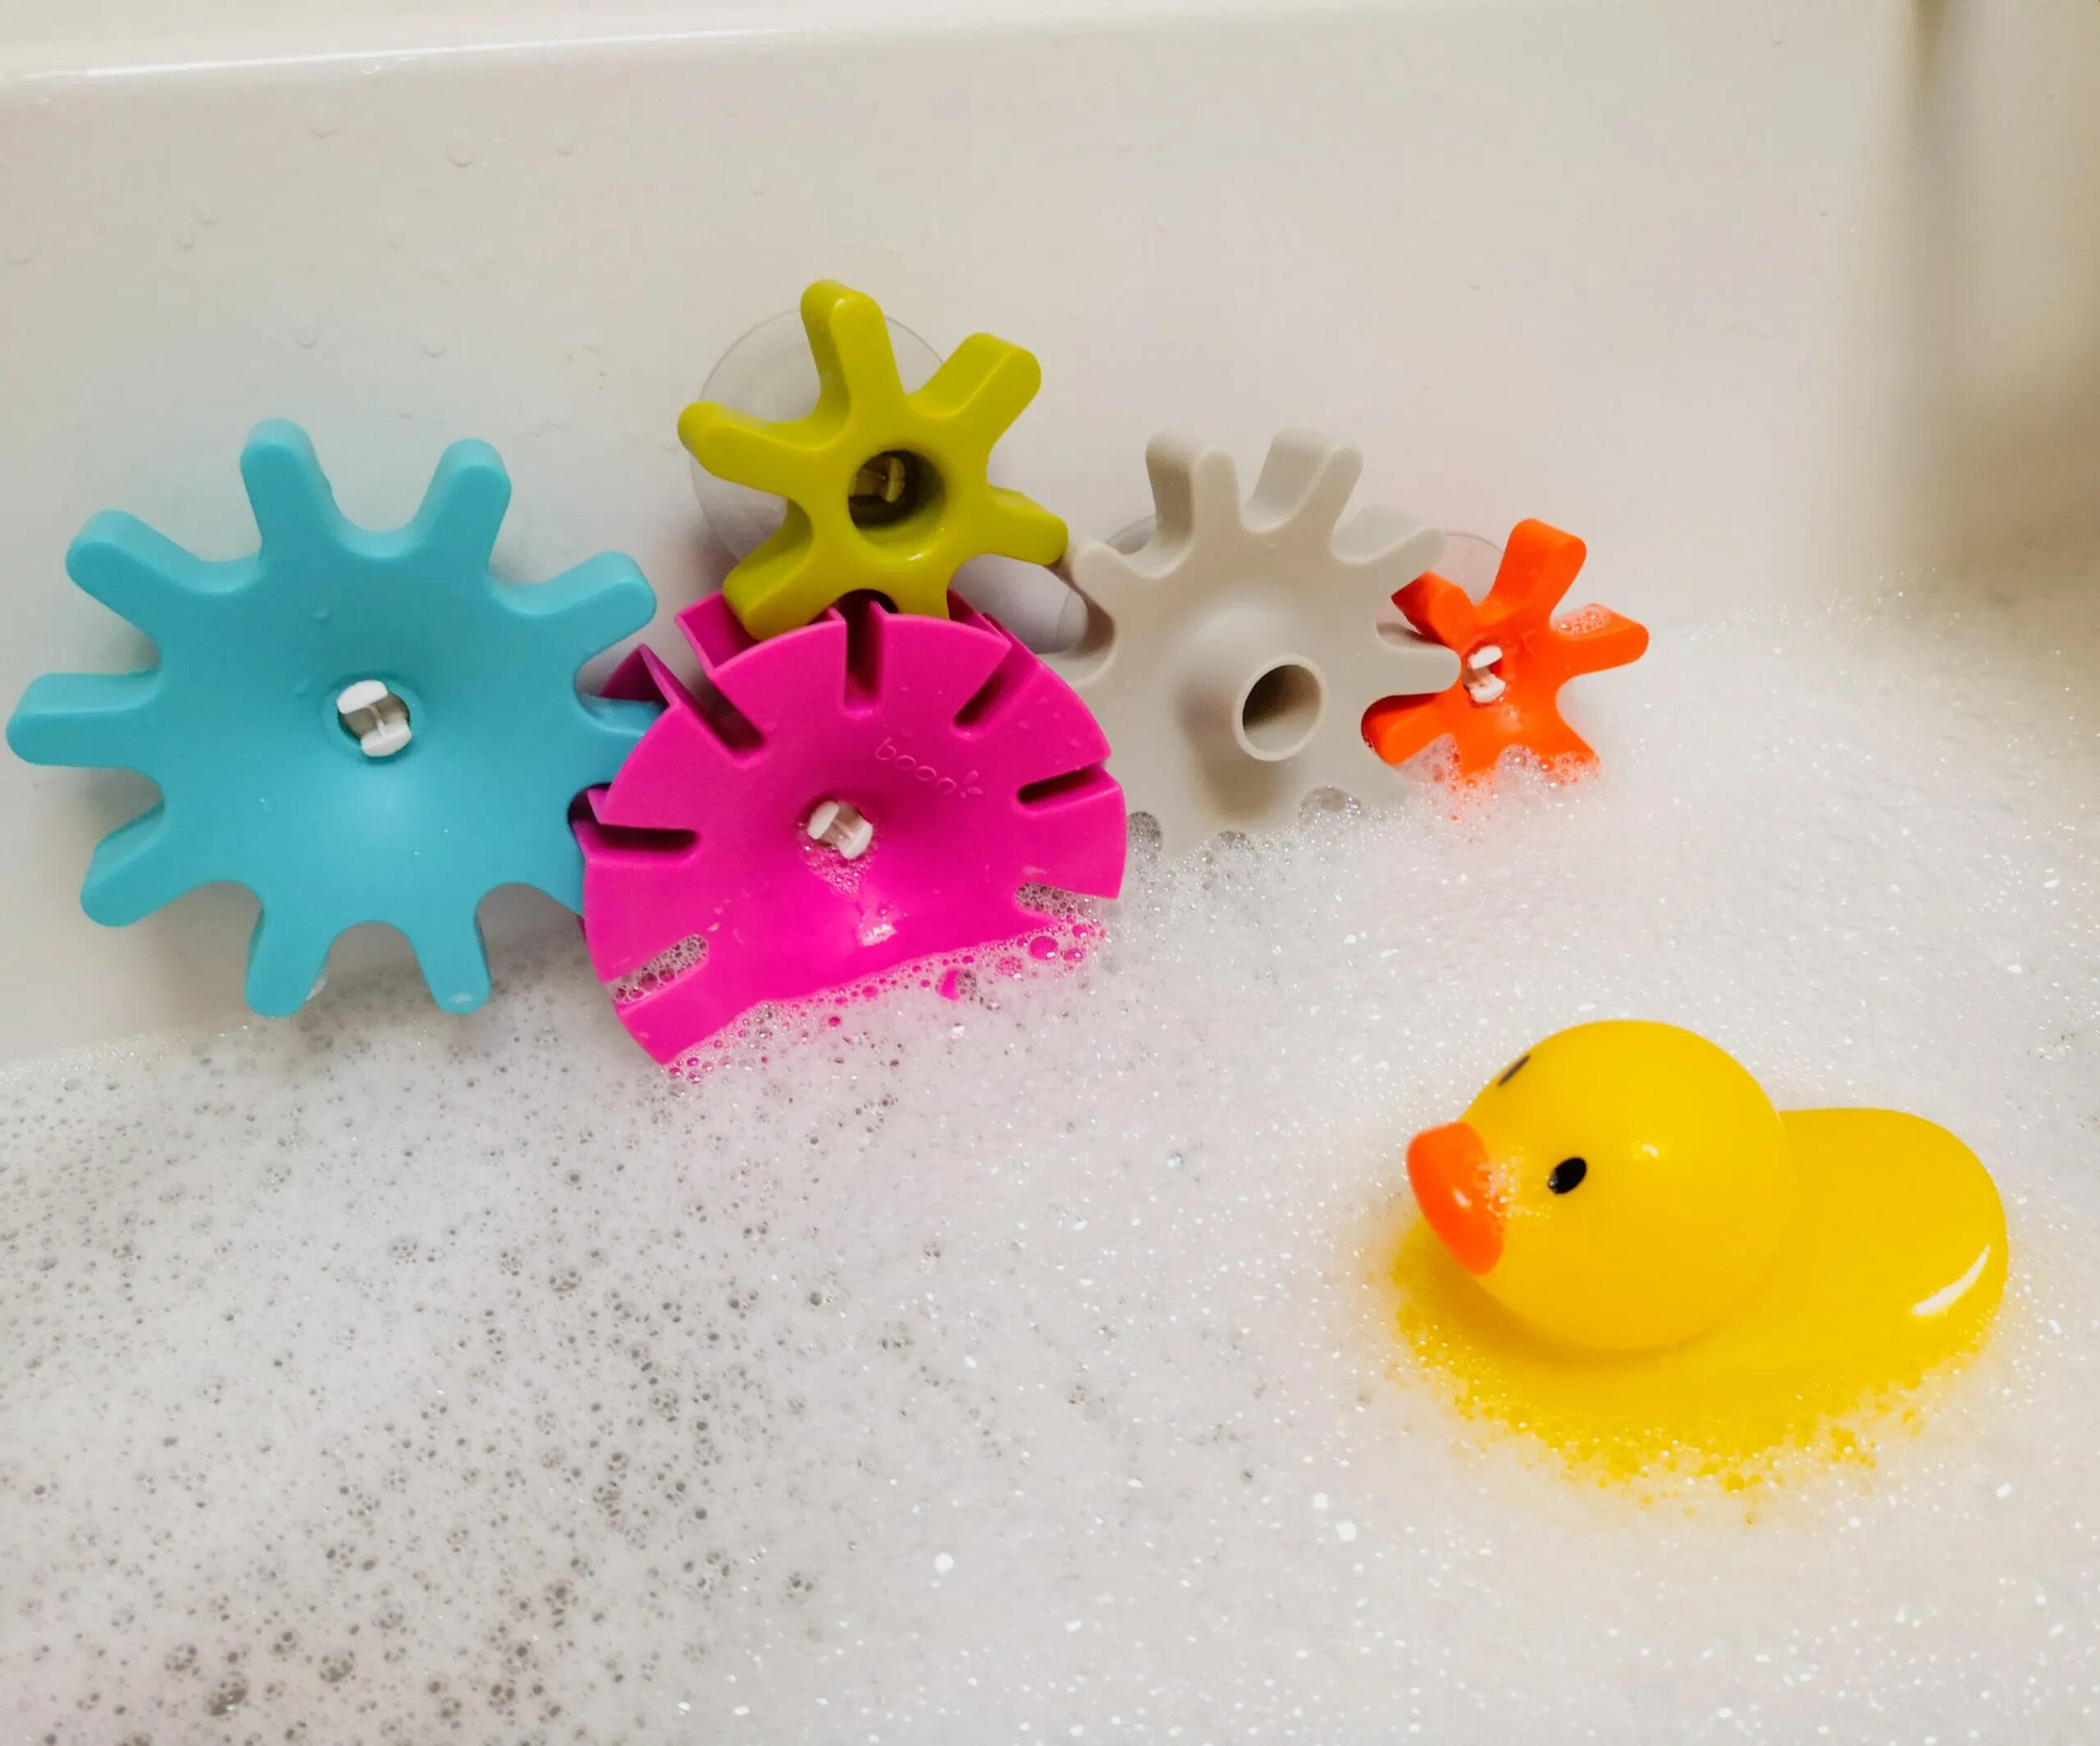 How To Get Toy Out Of Bathtub Drain